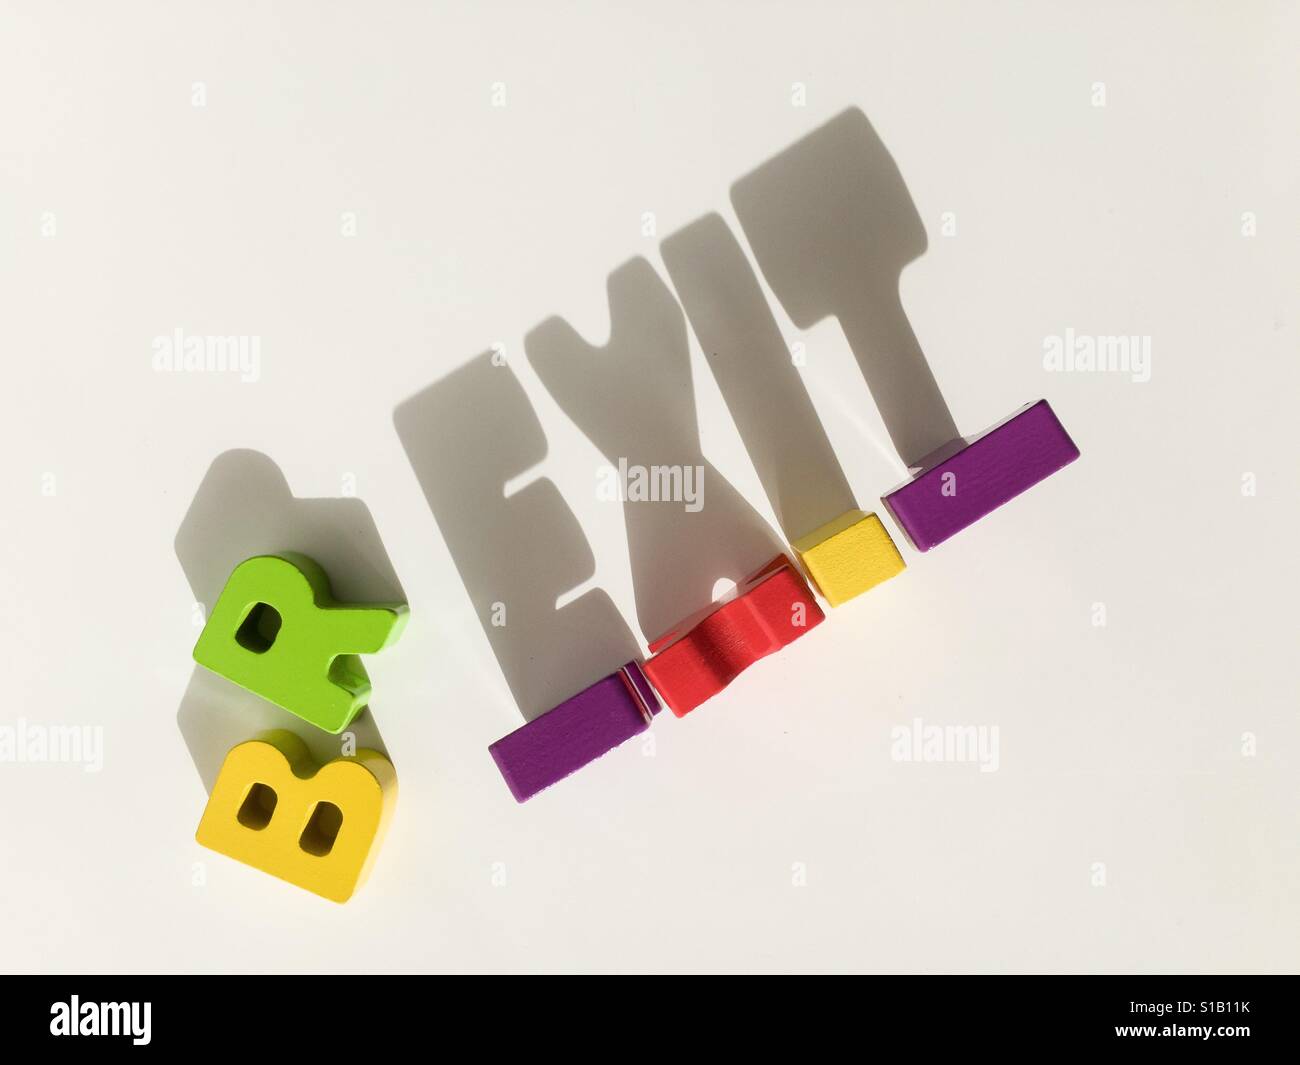 BREXIT written with colourful wooden letters Stock Photo